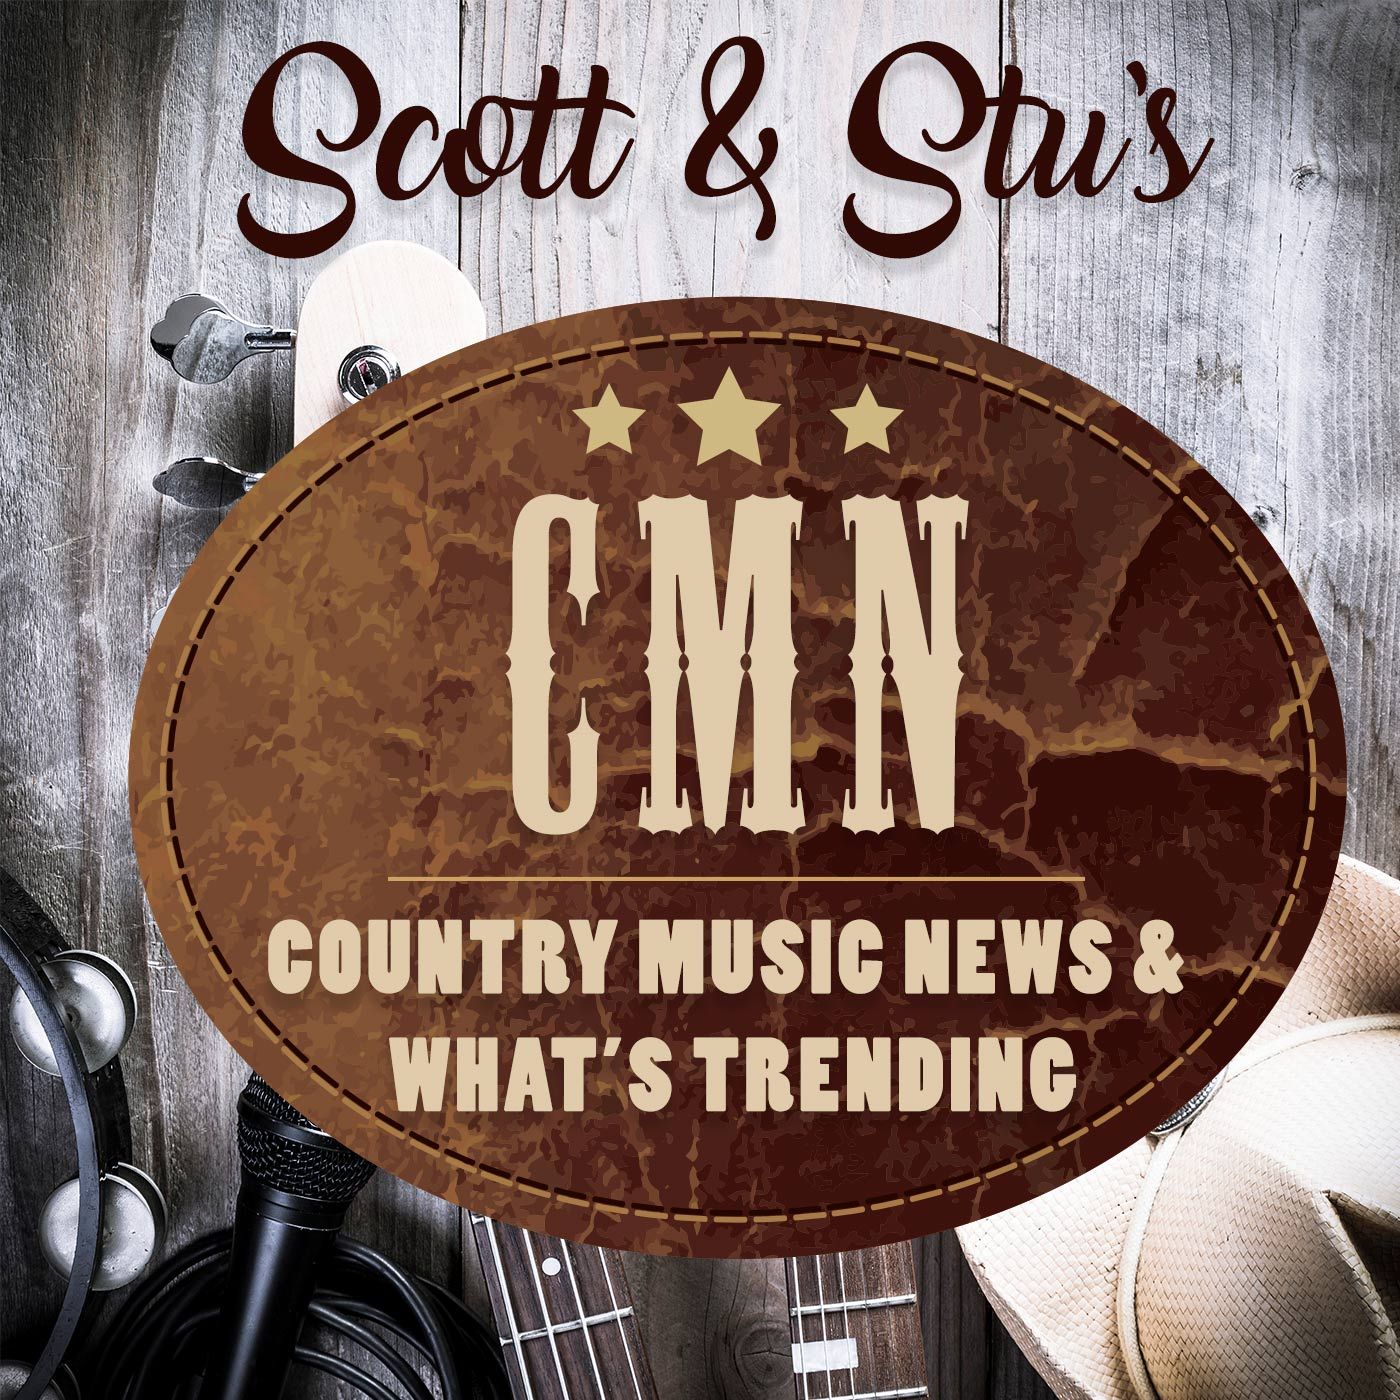 Country Music News & What’s Trending